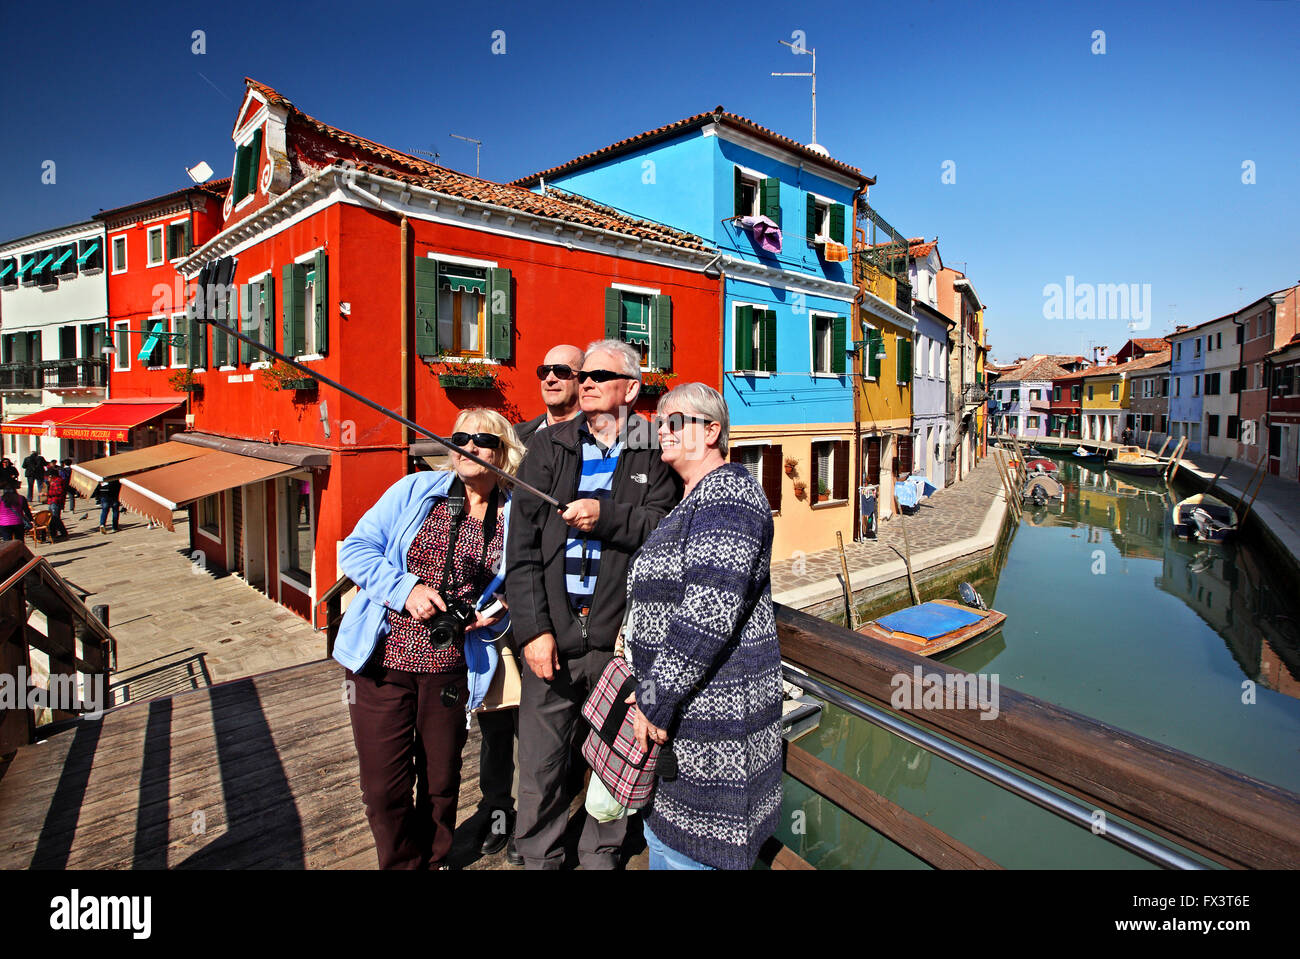 'Selfie' in front of colorful houses of picturesque  Burano island, Venice, Veneto, Italy. Stock Photo